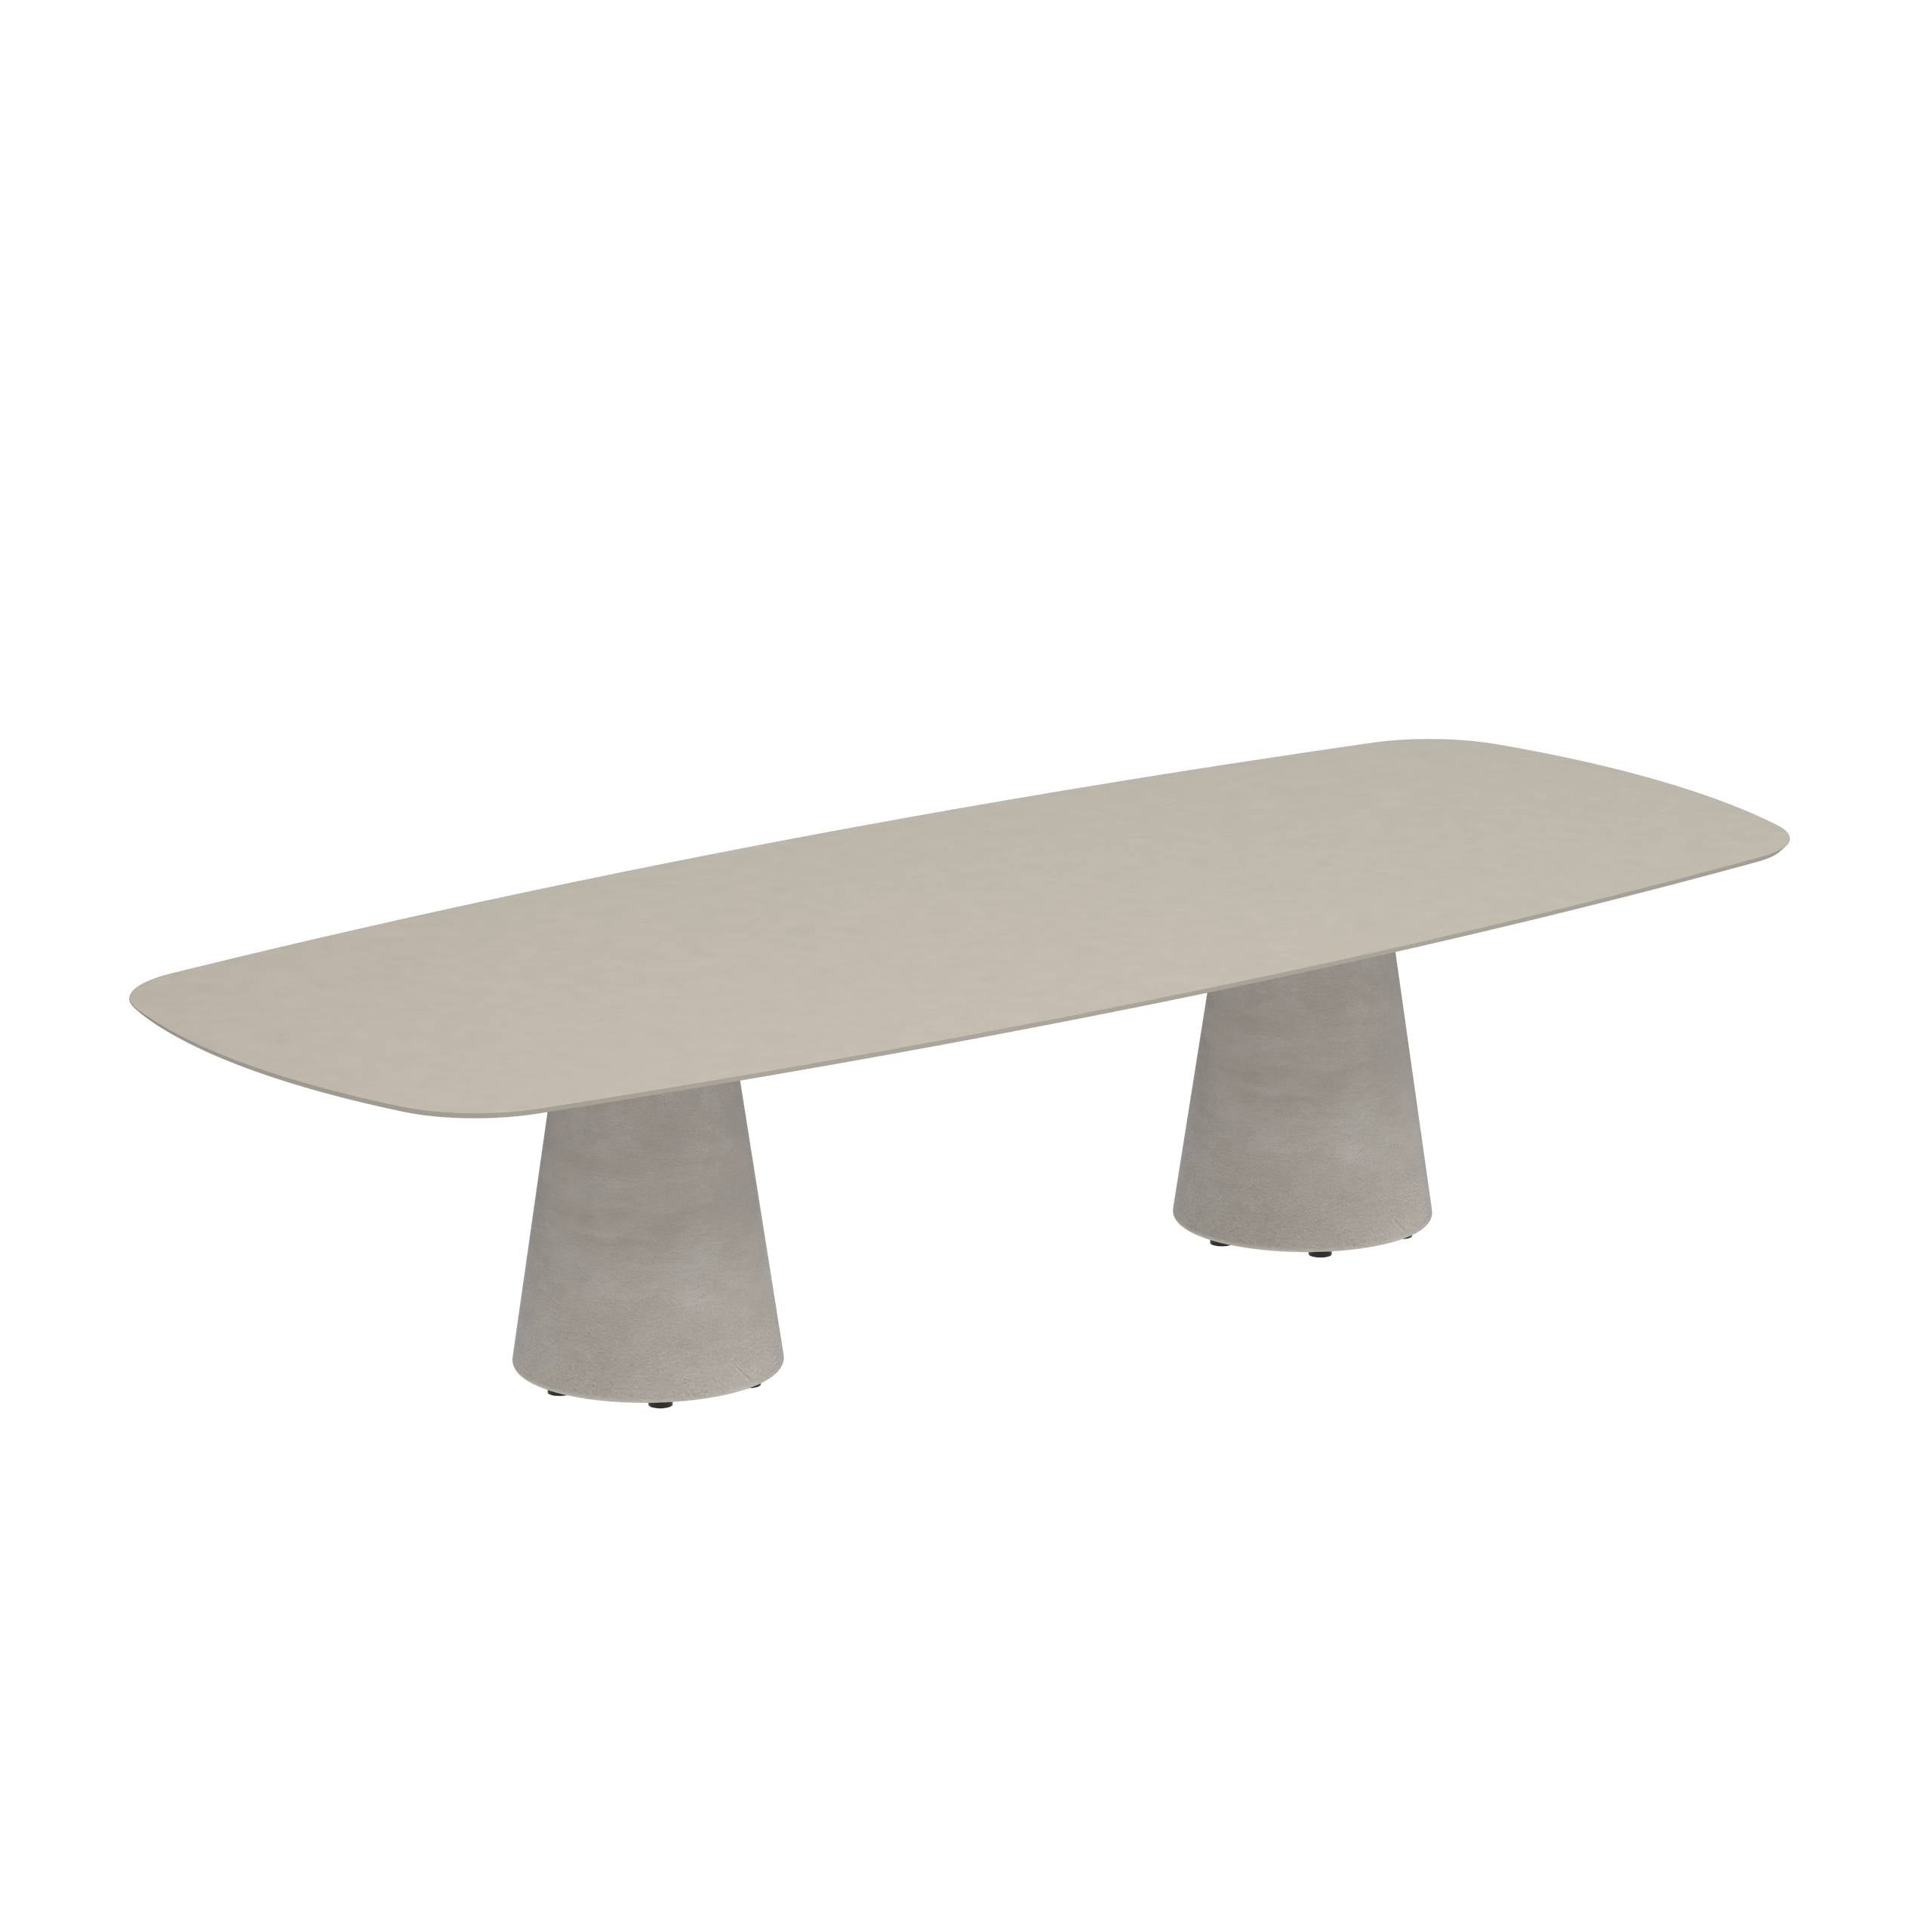 Conix Table 300x120 Cm Low Dining Legs Concrete Cement Grey - Table Top Ceramic Pearl Grey